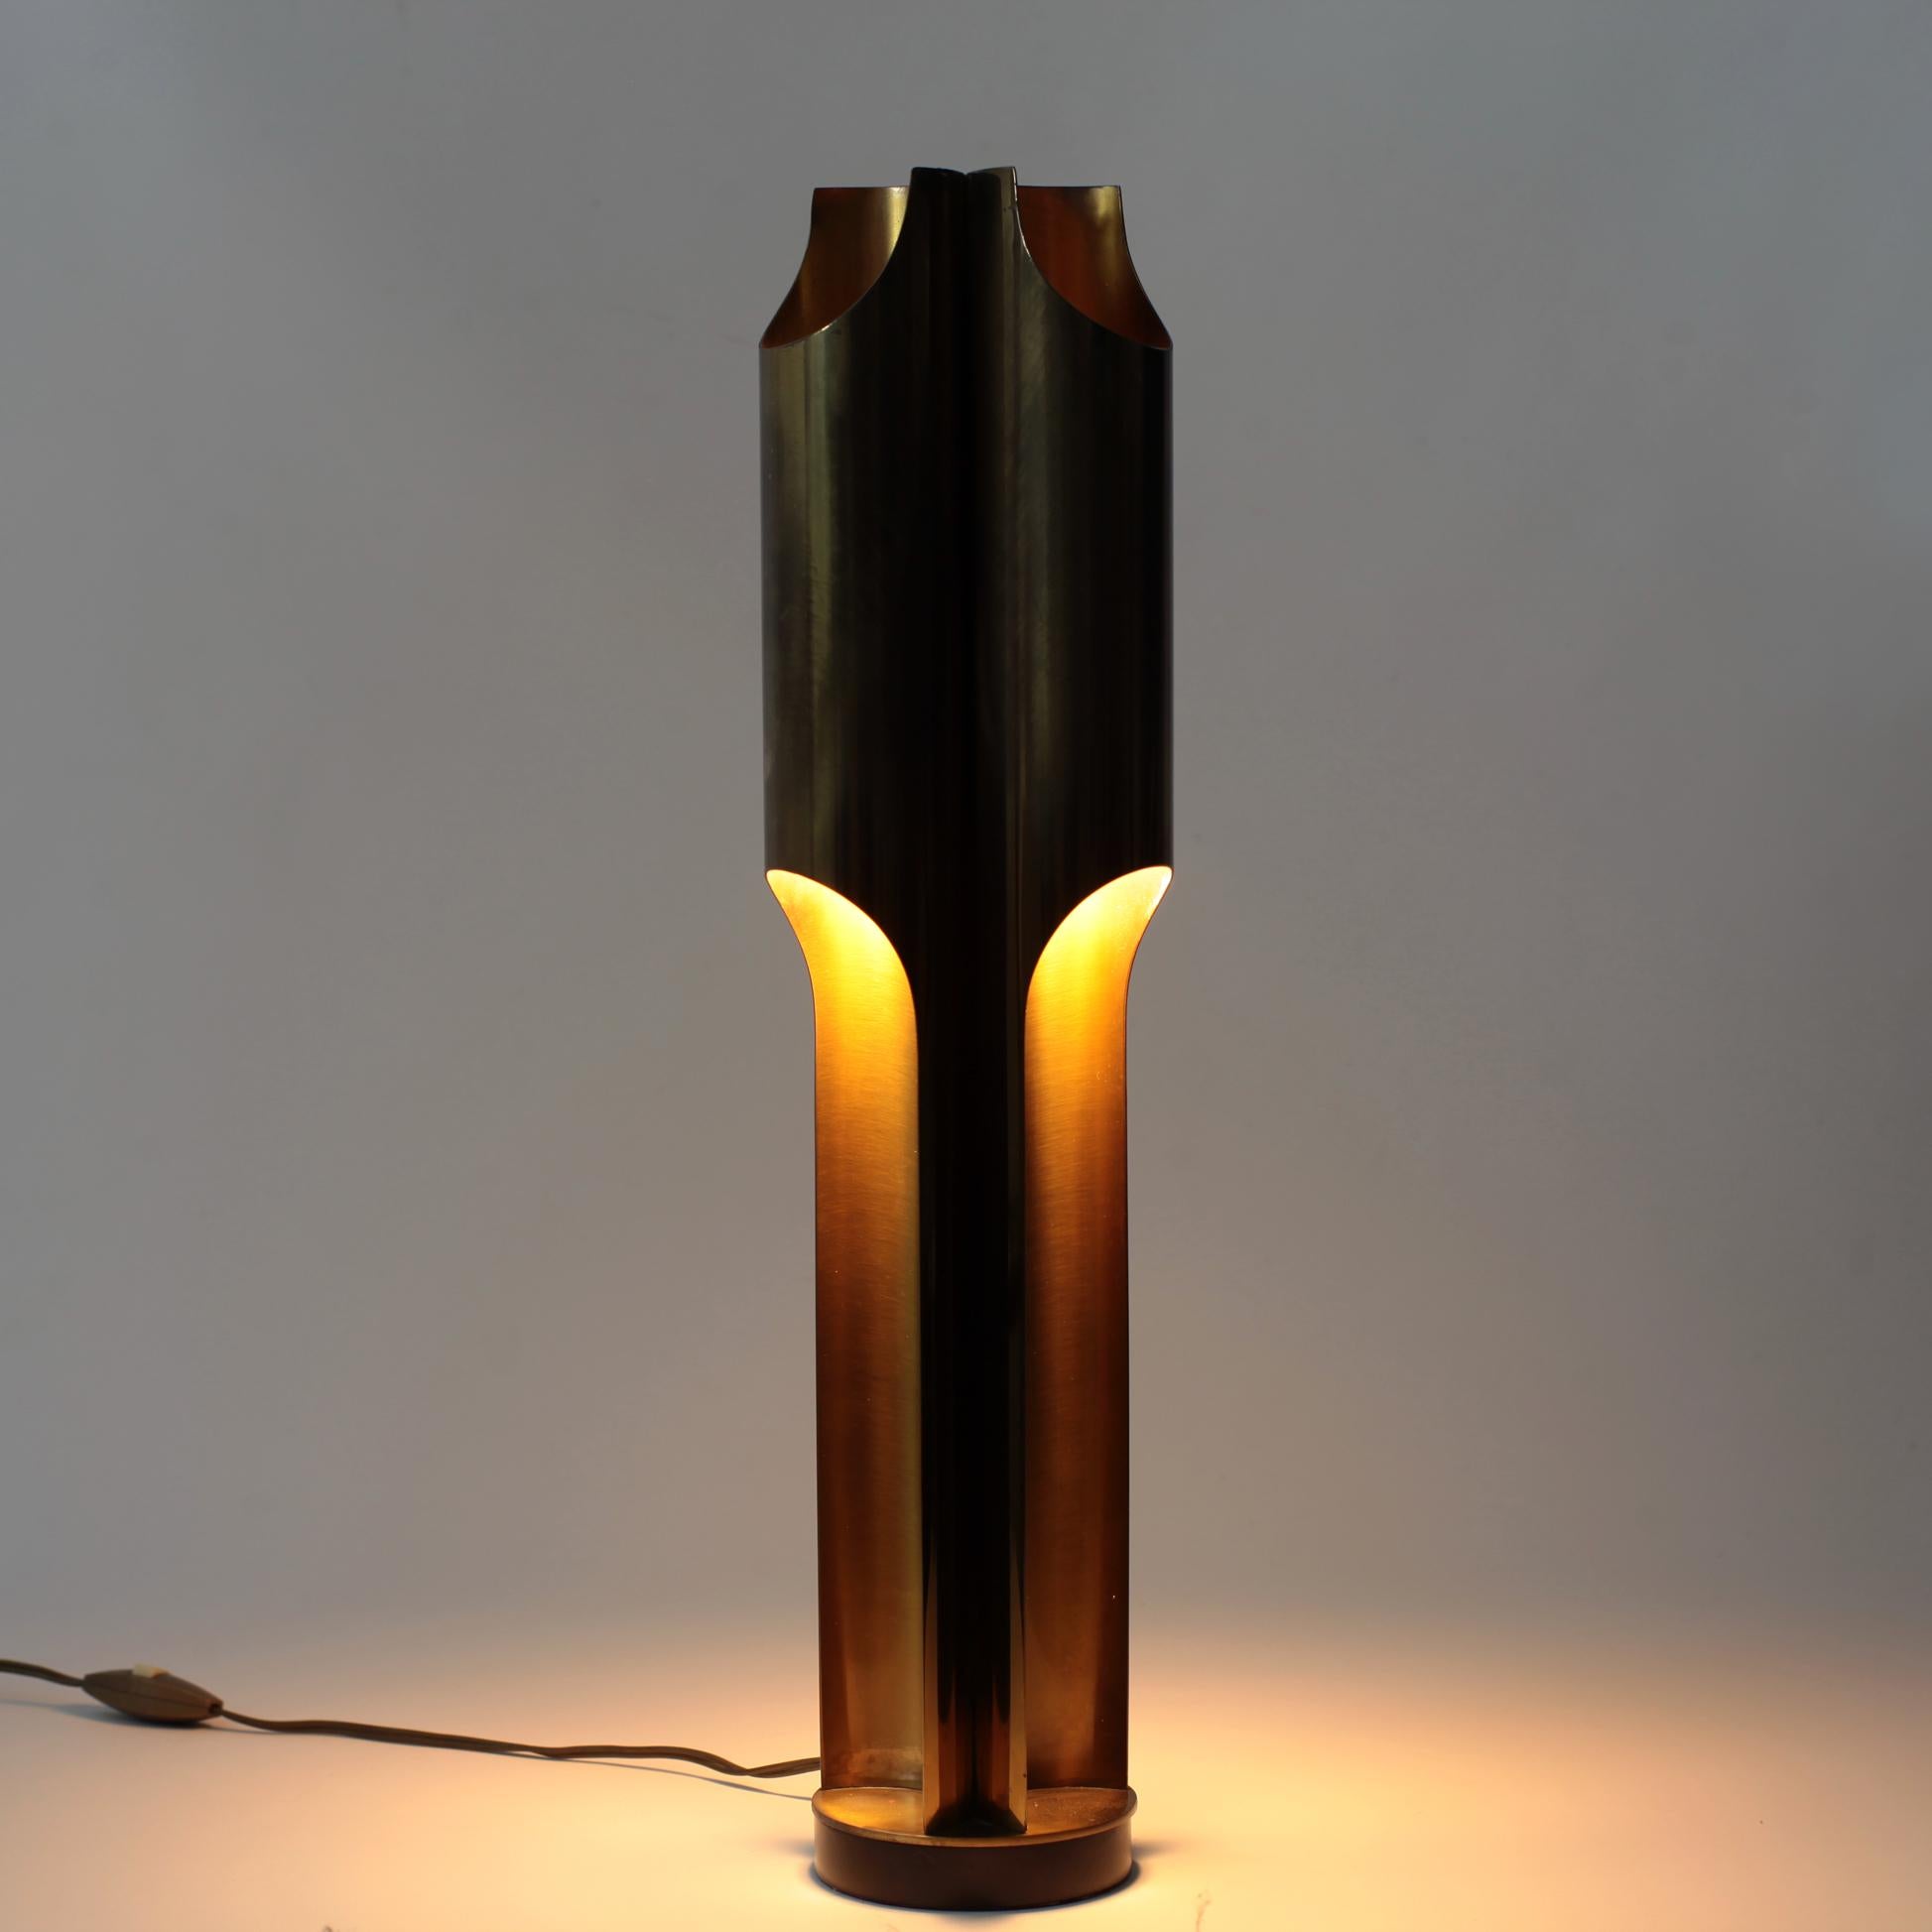 Rare brass table lamp by Maison Charles model Orgues, France, 1960s.
Manufacturer stamp
3 light.
Beautiful patina.
 